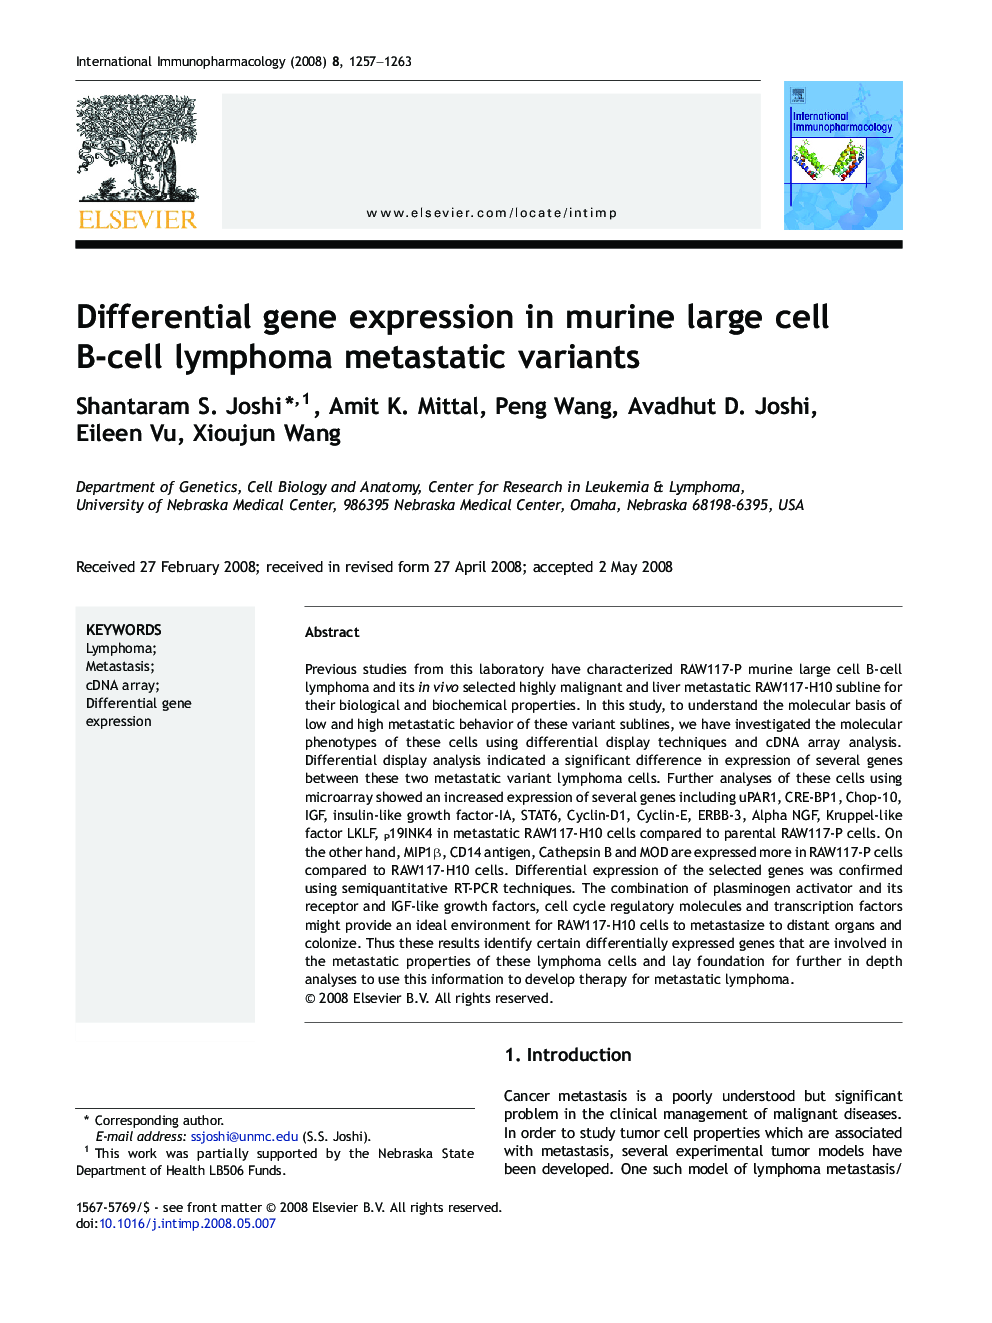 Differential gene expression in murine large cell B-cell lymphoma metastatic variants